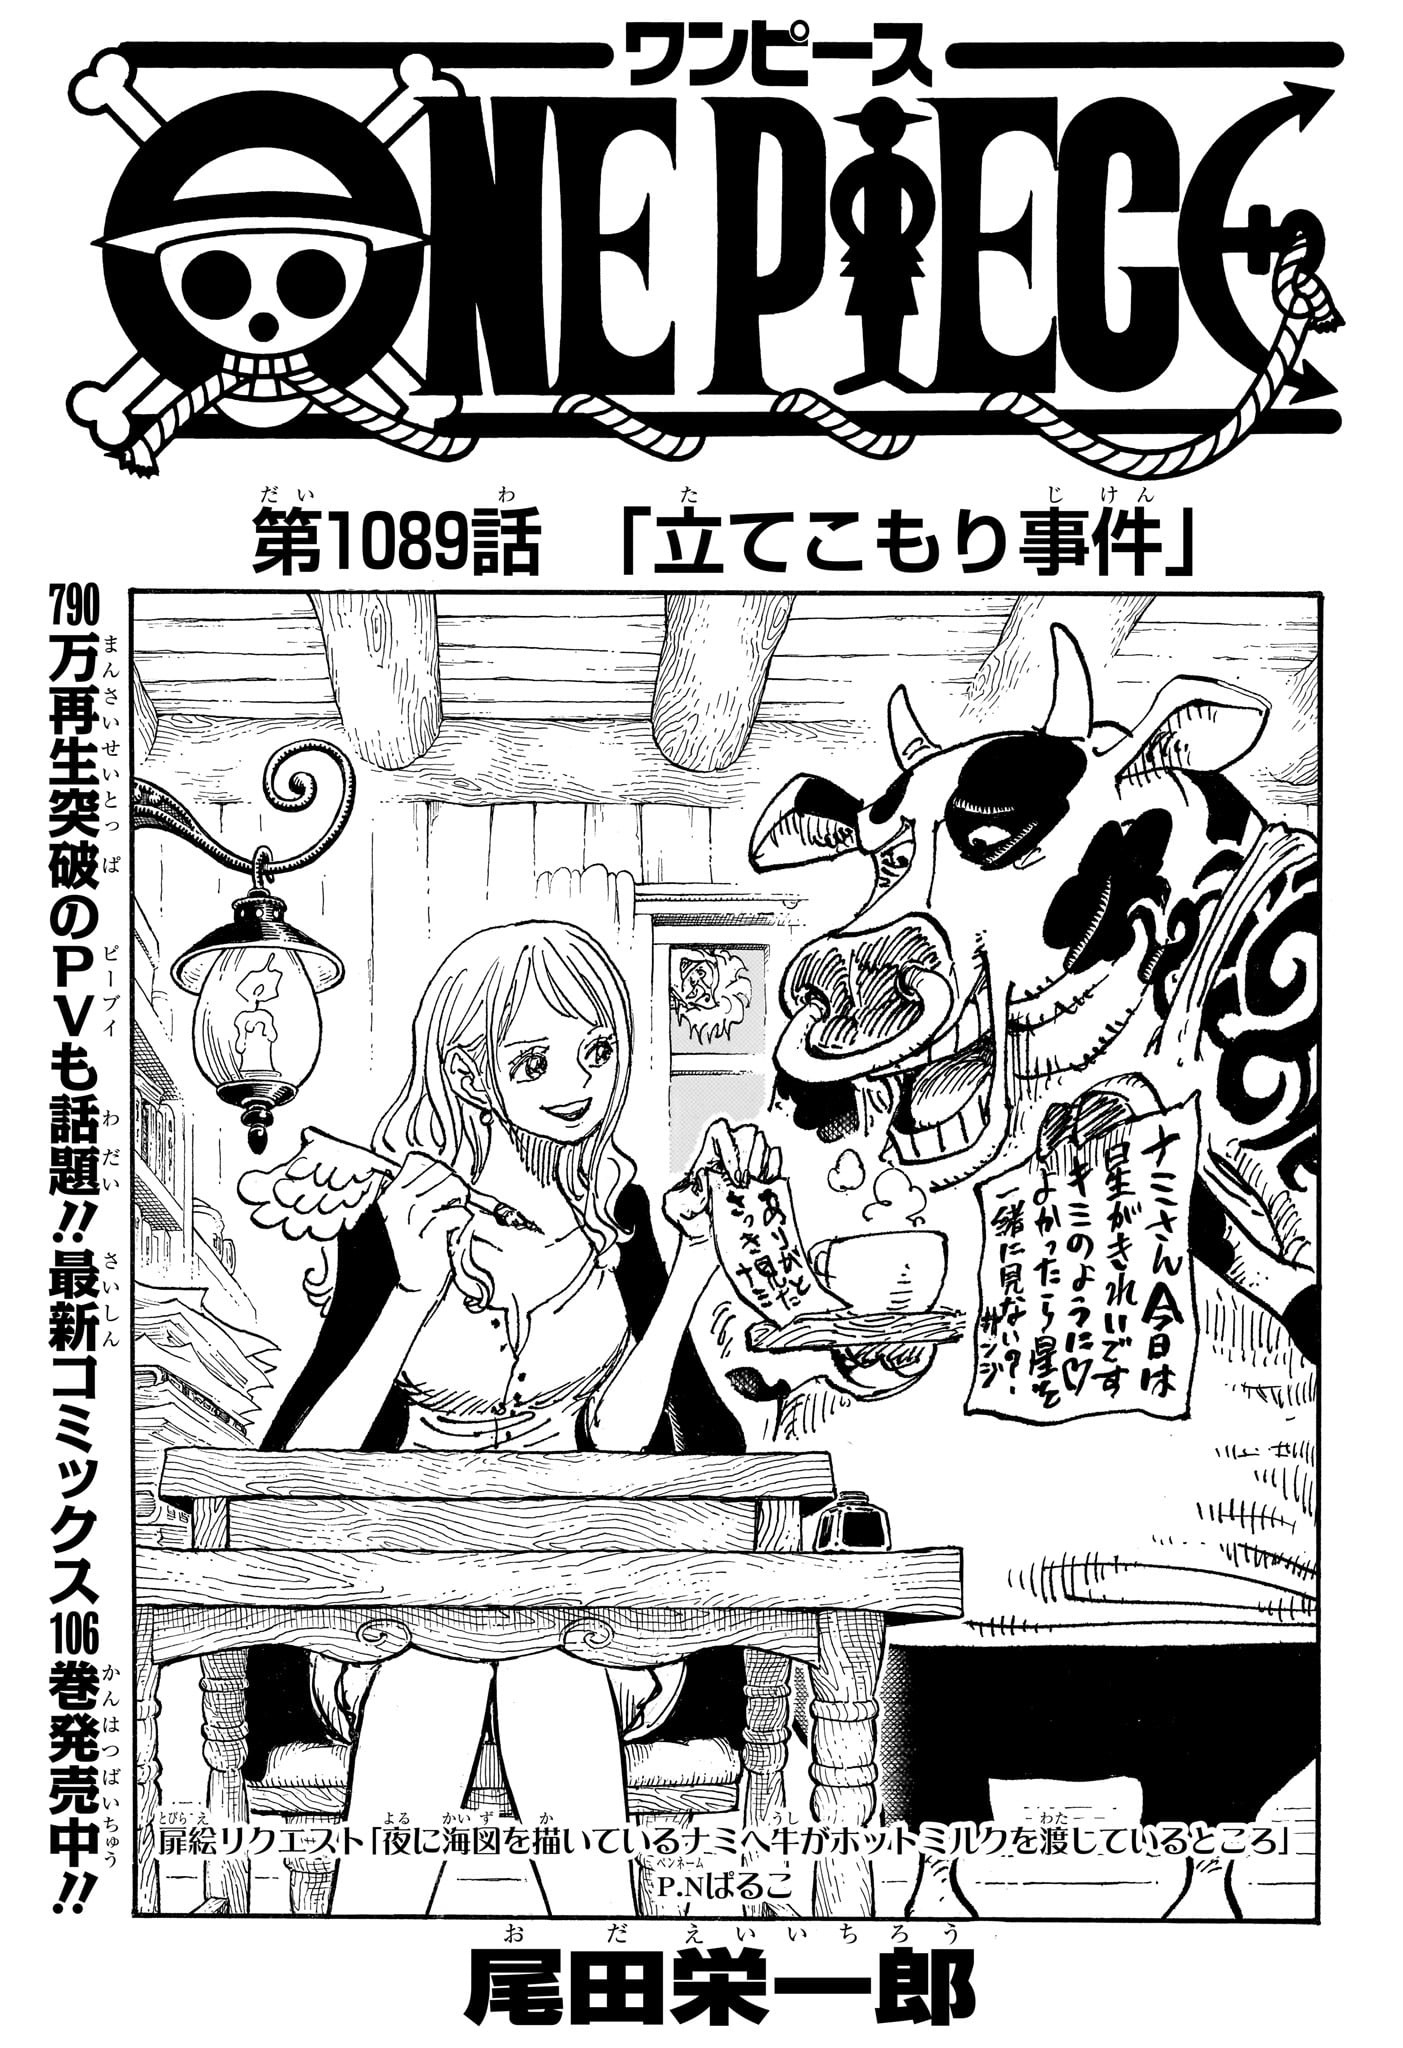 One Piece - Chapter 1089 - Page 1